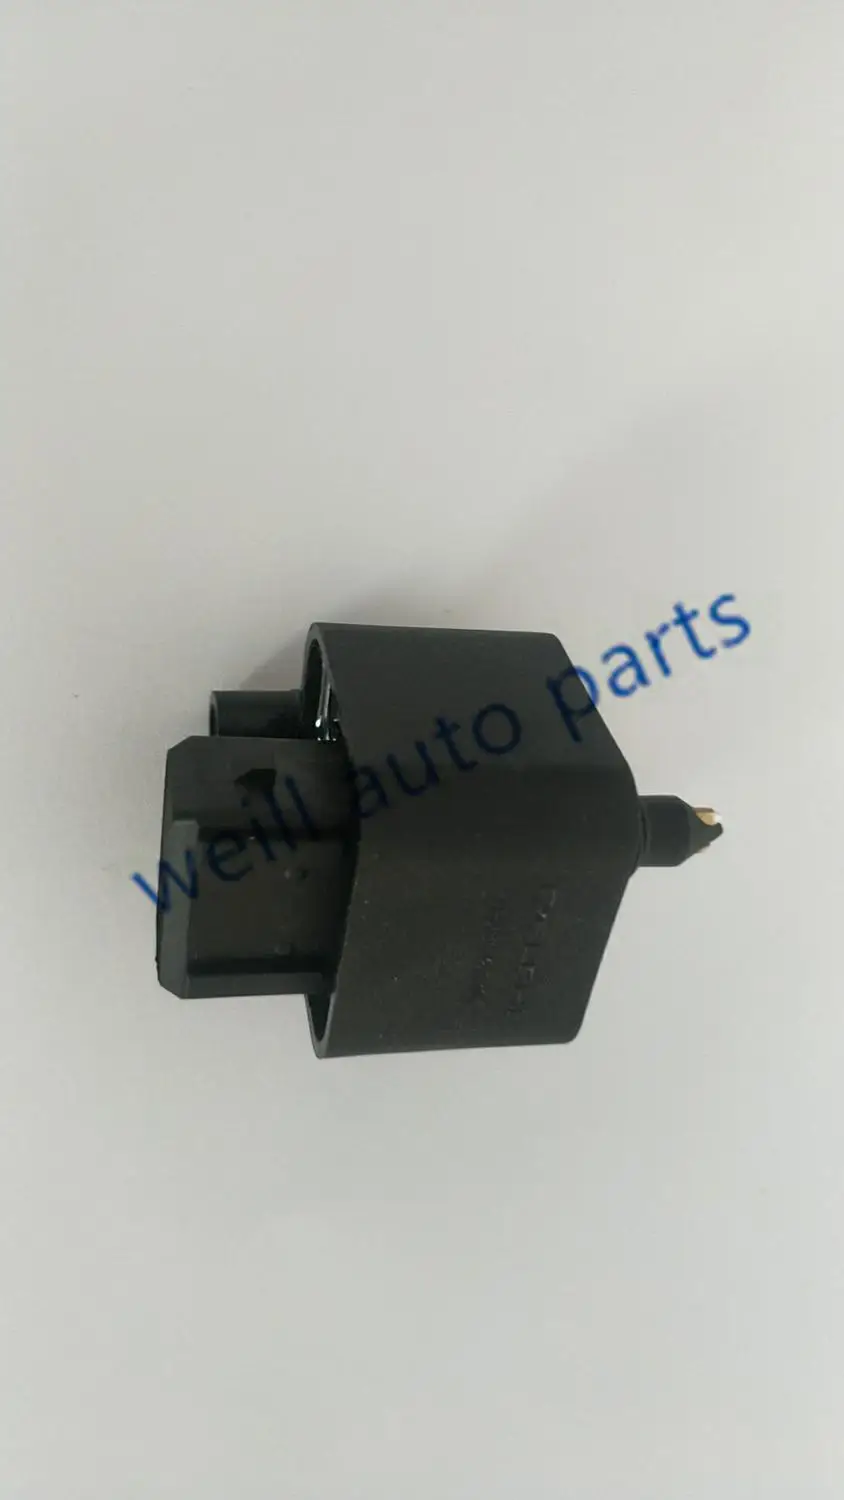 111400ED01 1111401AED01 4D20 Fuel Filter Sensor  WATER LEVEL for Great Wall Haval H5 H6 Wingle 5